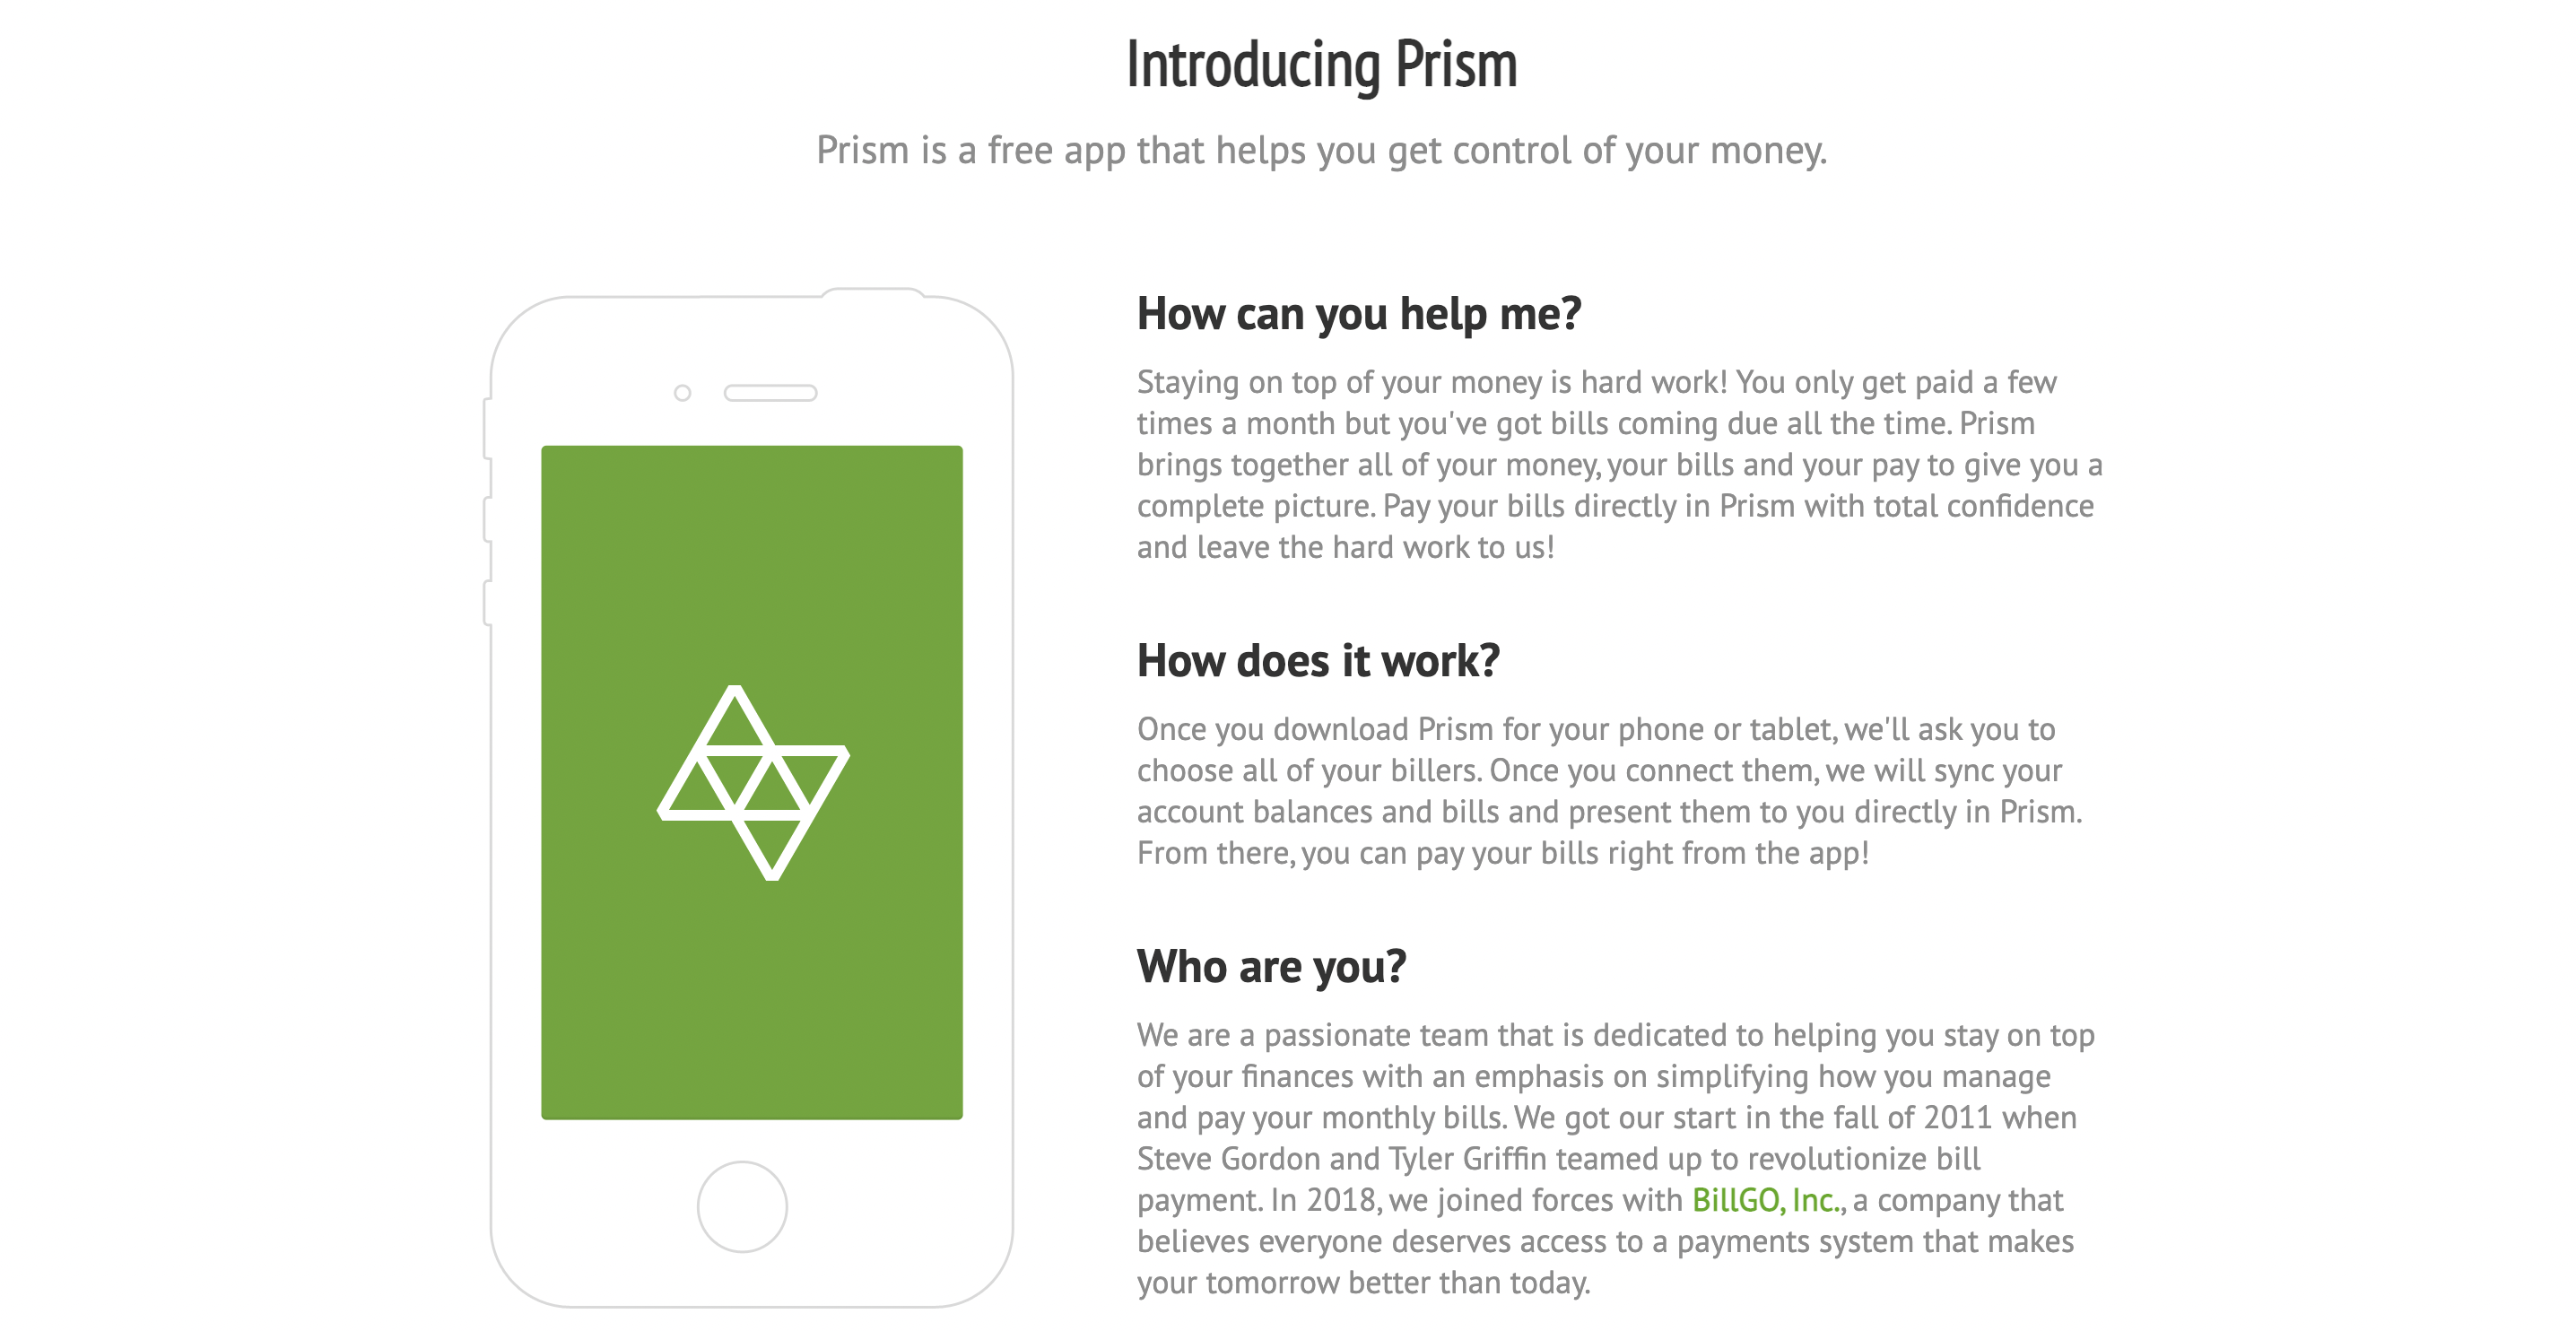 Prism thMagic for your bills
All your bills at a glance, always up to date